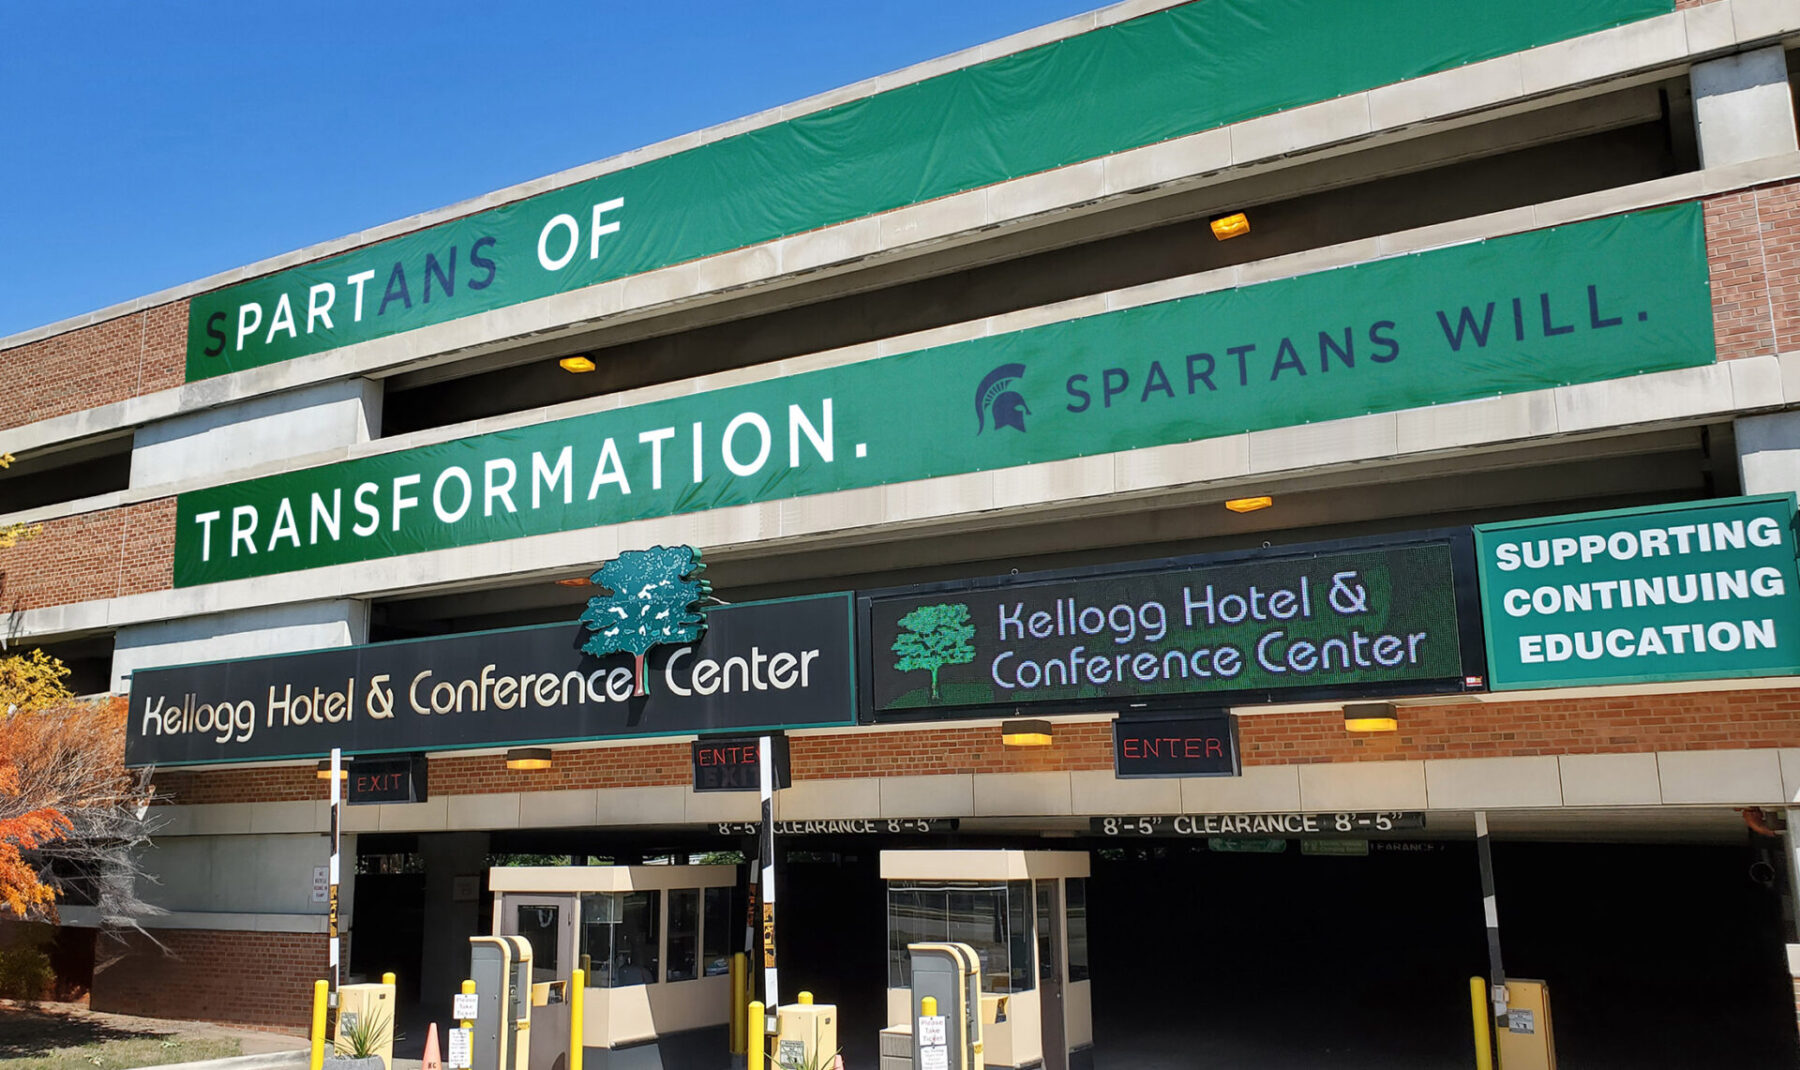 Parking garage banners with headline "Spartans of transformation"